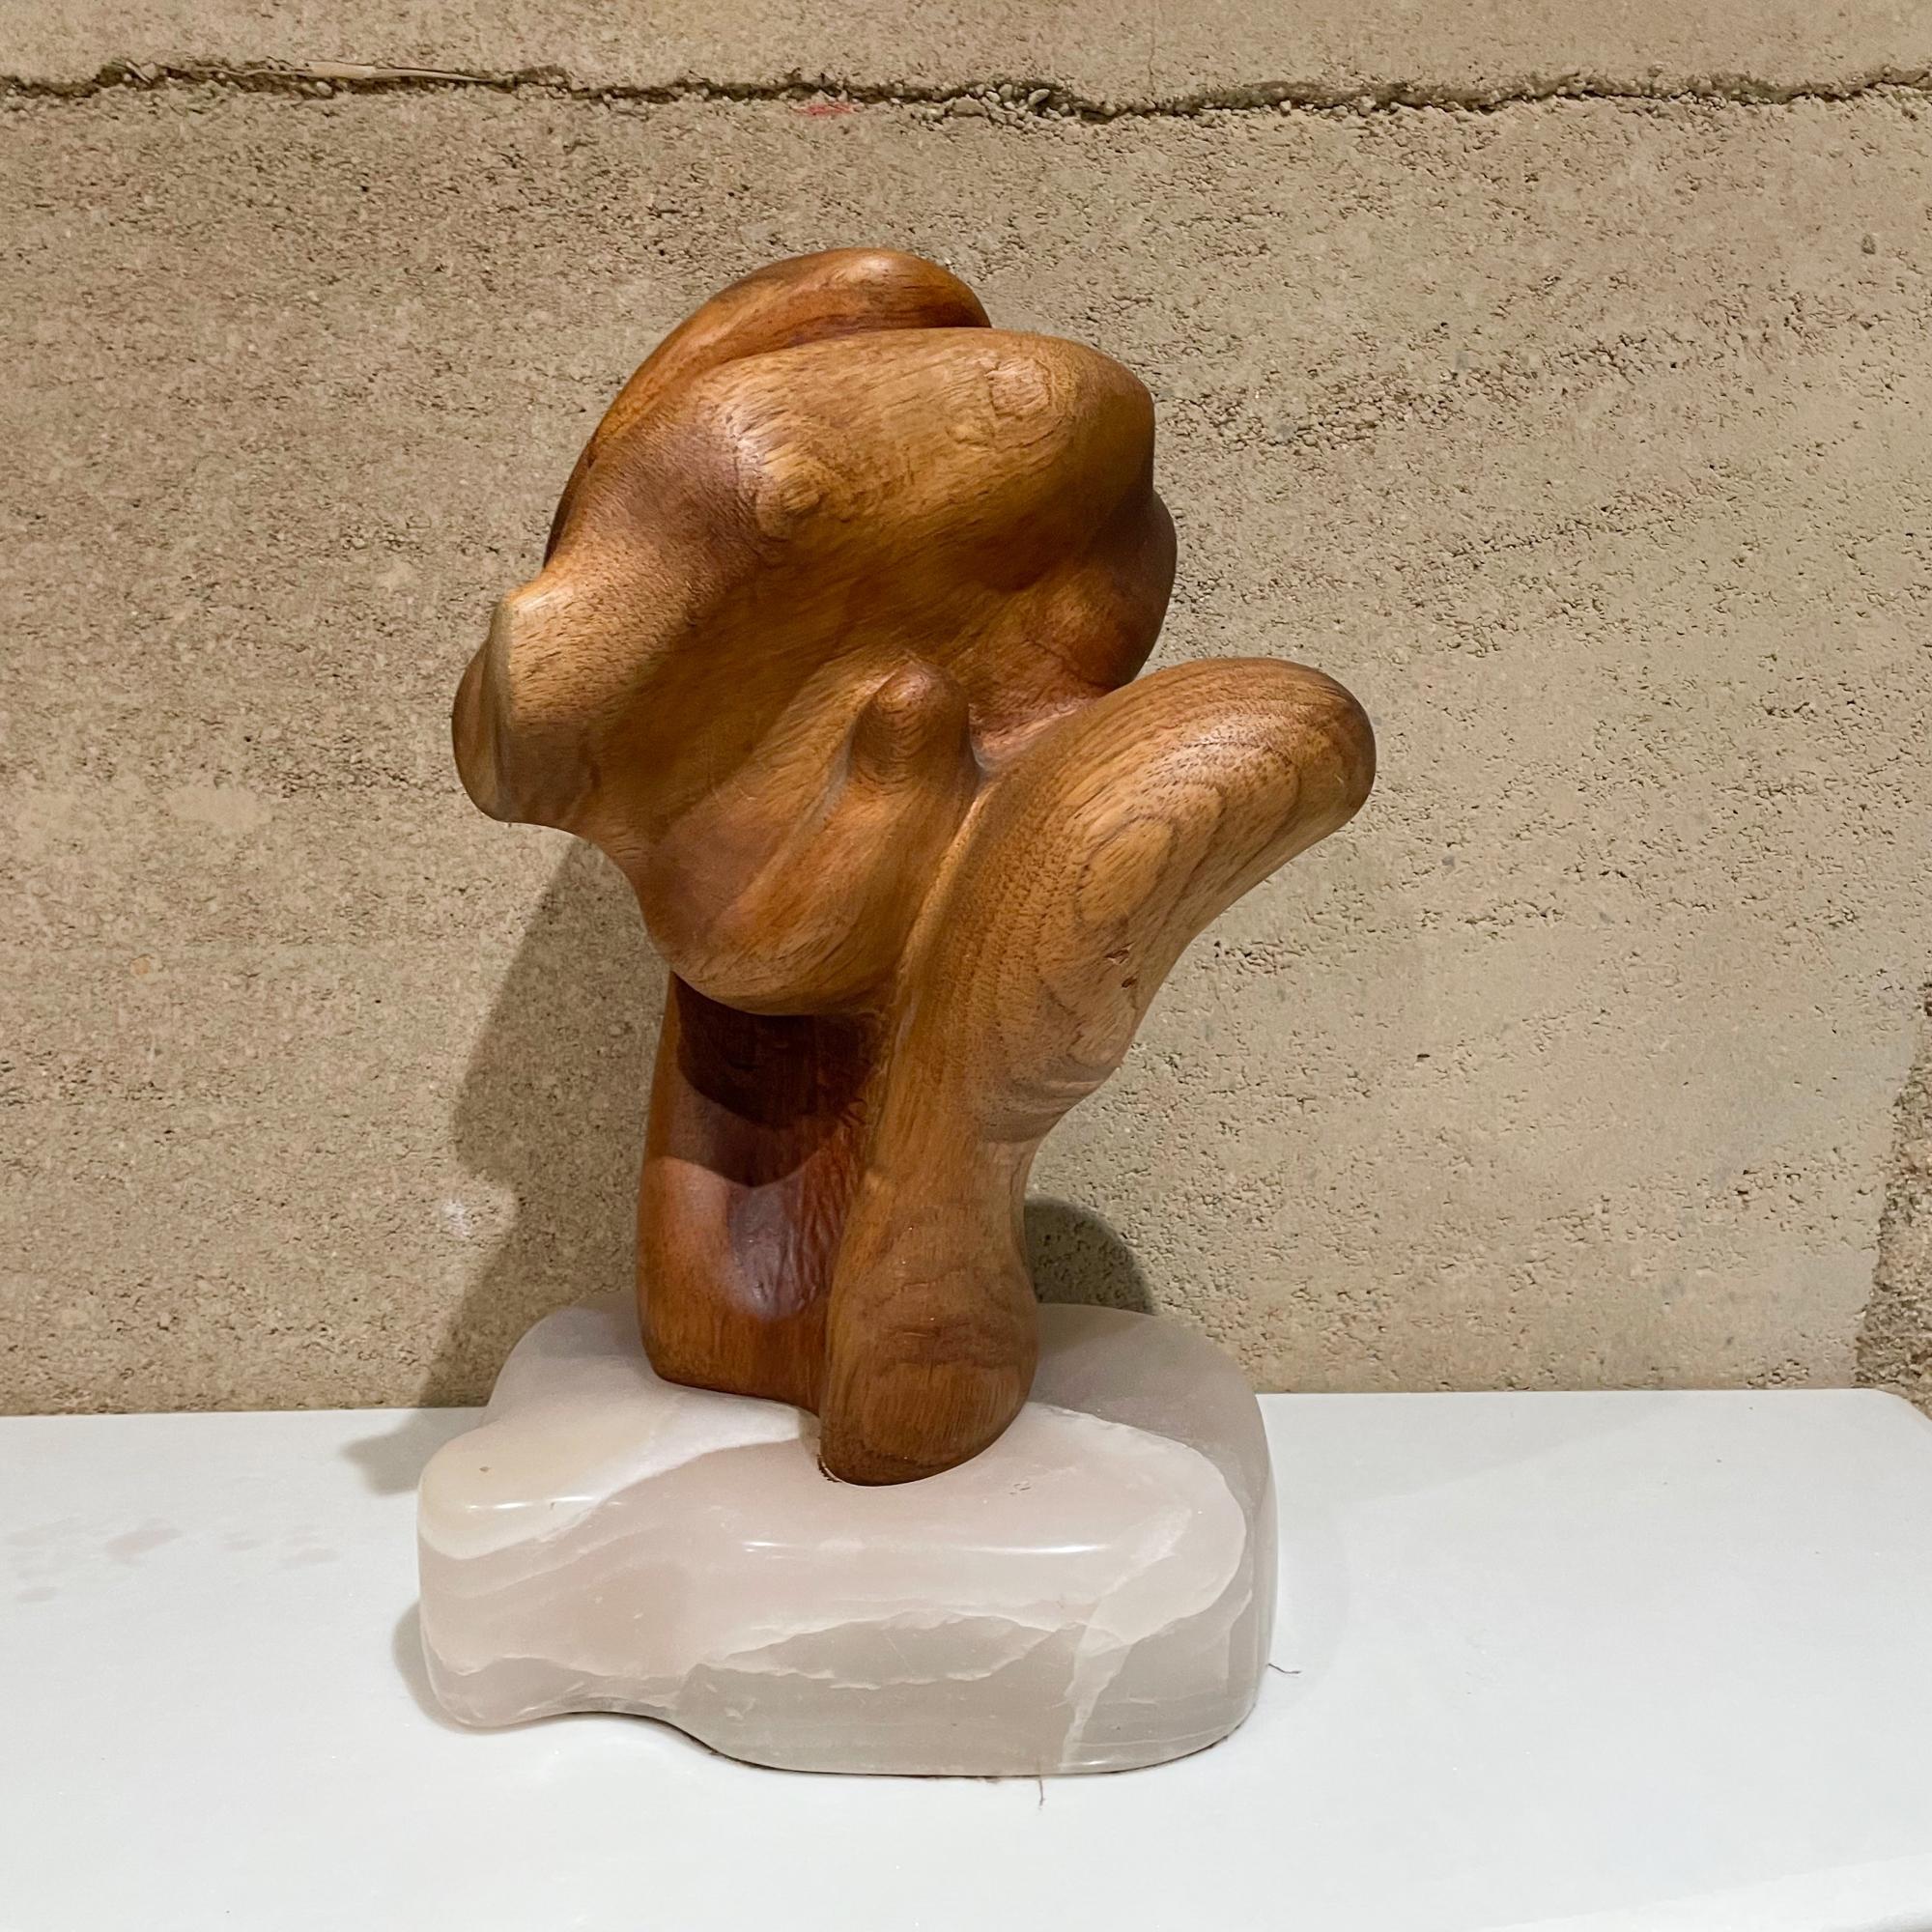 Mid-20th Century Abstract Organic Form Exquisite Wood Grain Sculpture on Translucent Stone Base For Sale